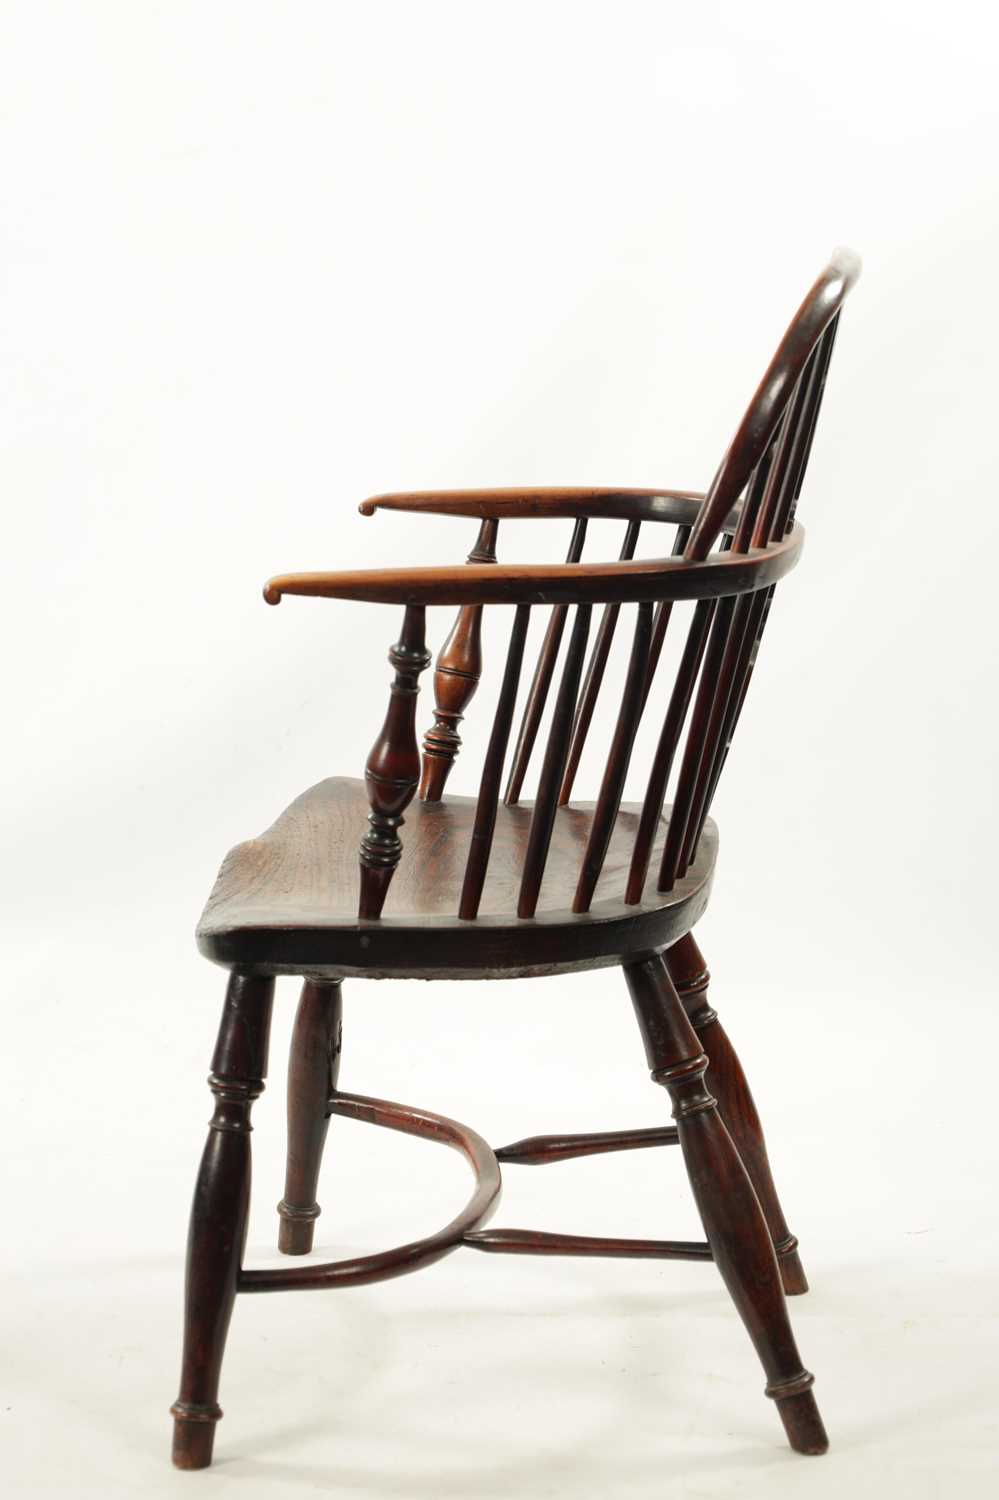 AN EARLY 19TH CENTURY YEW WOOD LOW BACK WINDSOR CHAIR - Image 5 of 6